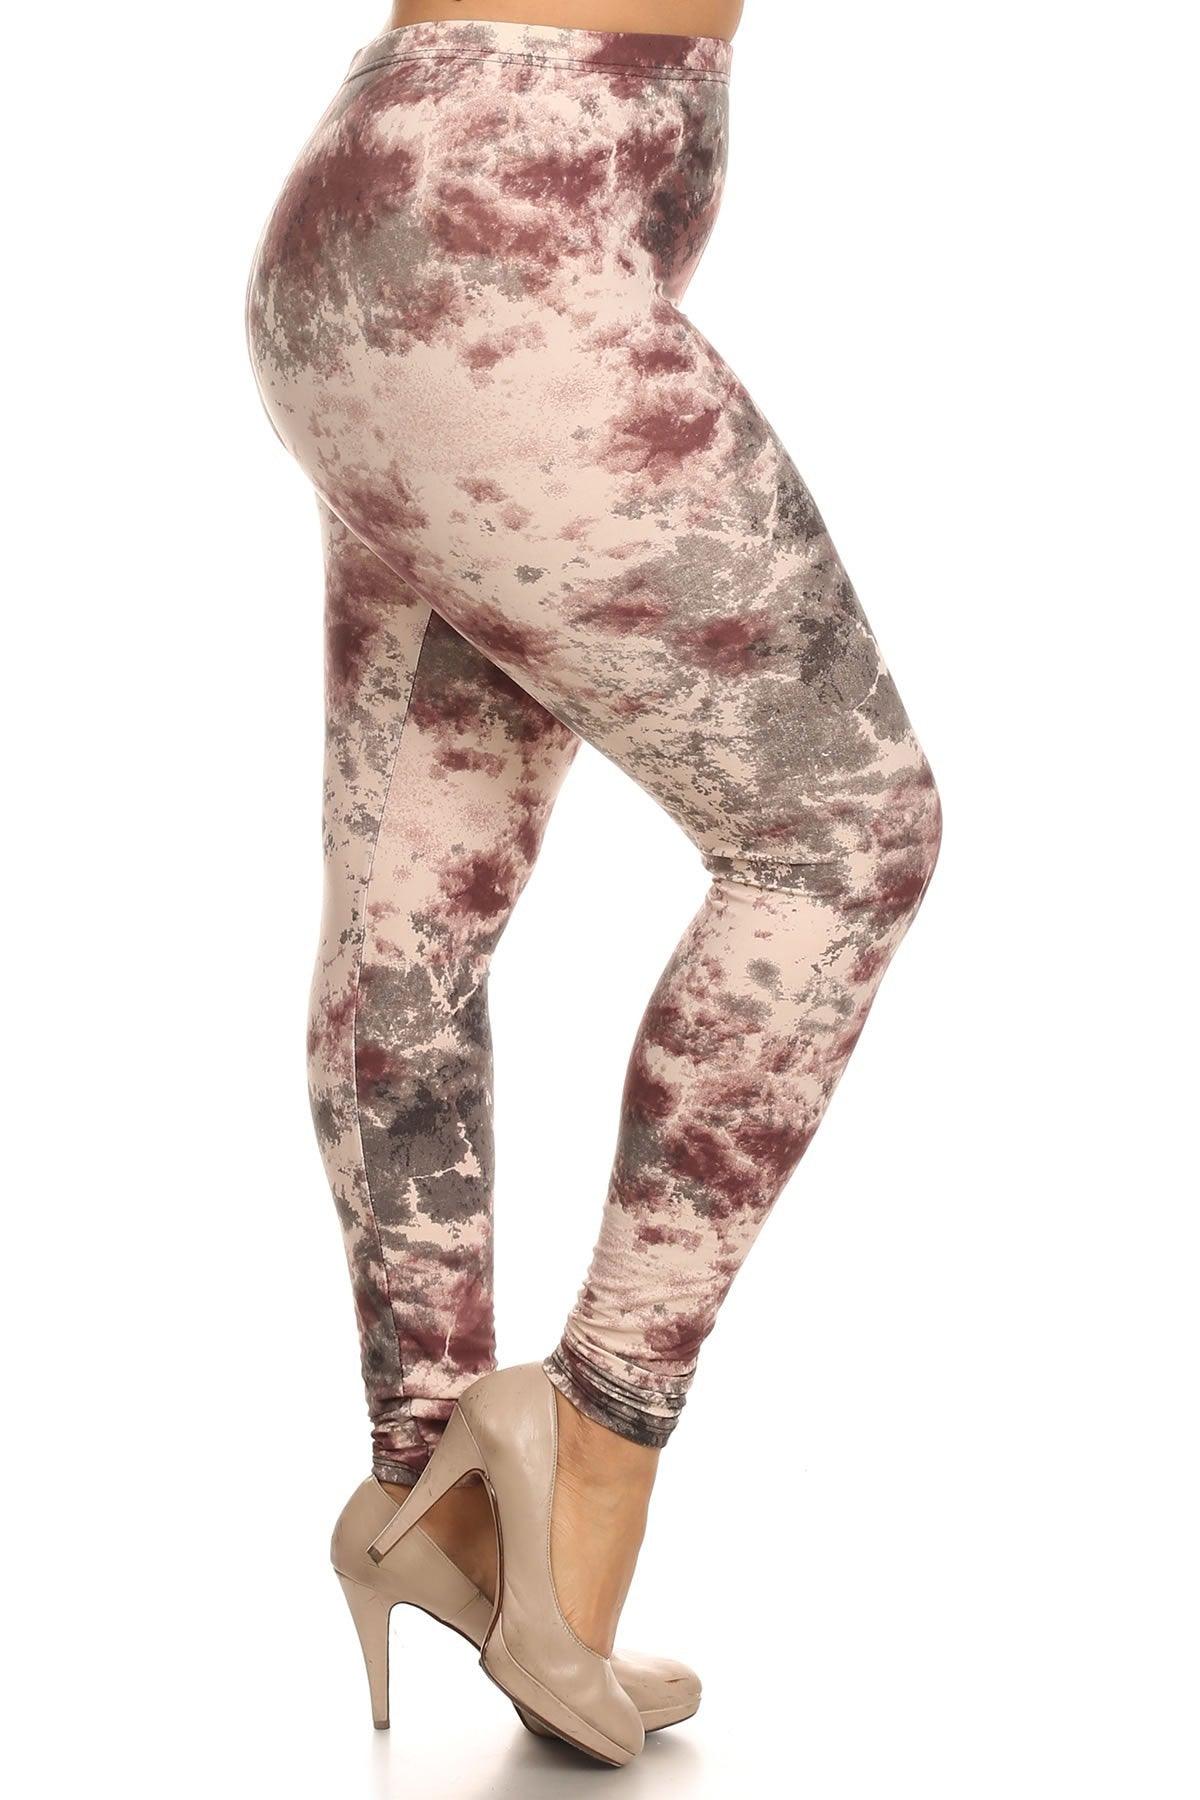 Plus Size Tie Dye Print, Full Length Leggings In A Fitted Style With A Banded High Waist - Kreative Passions